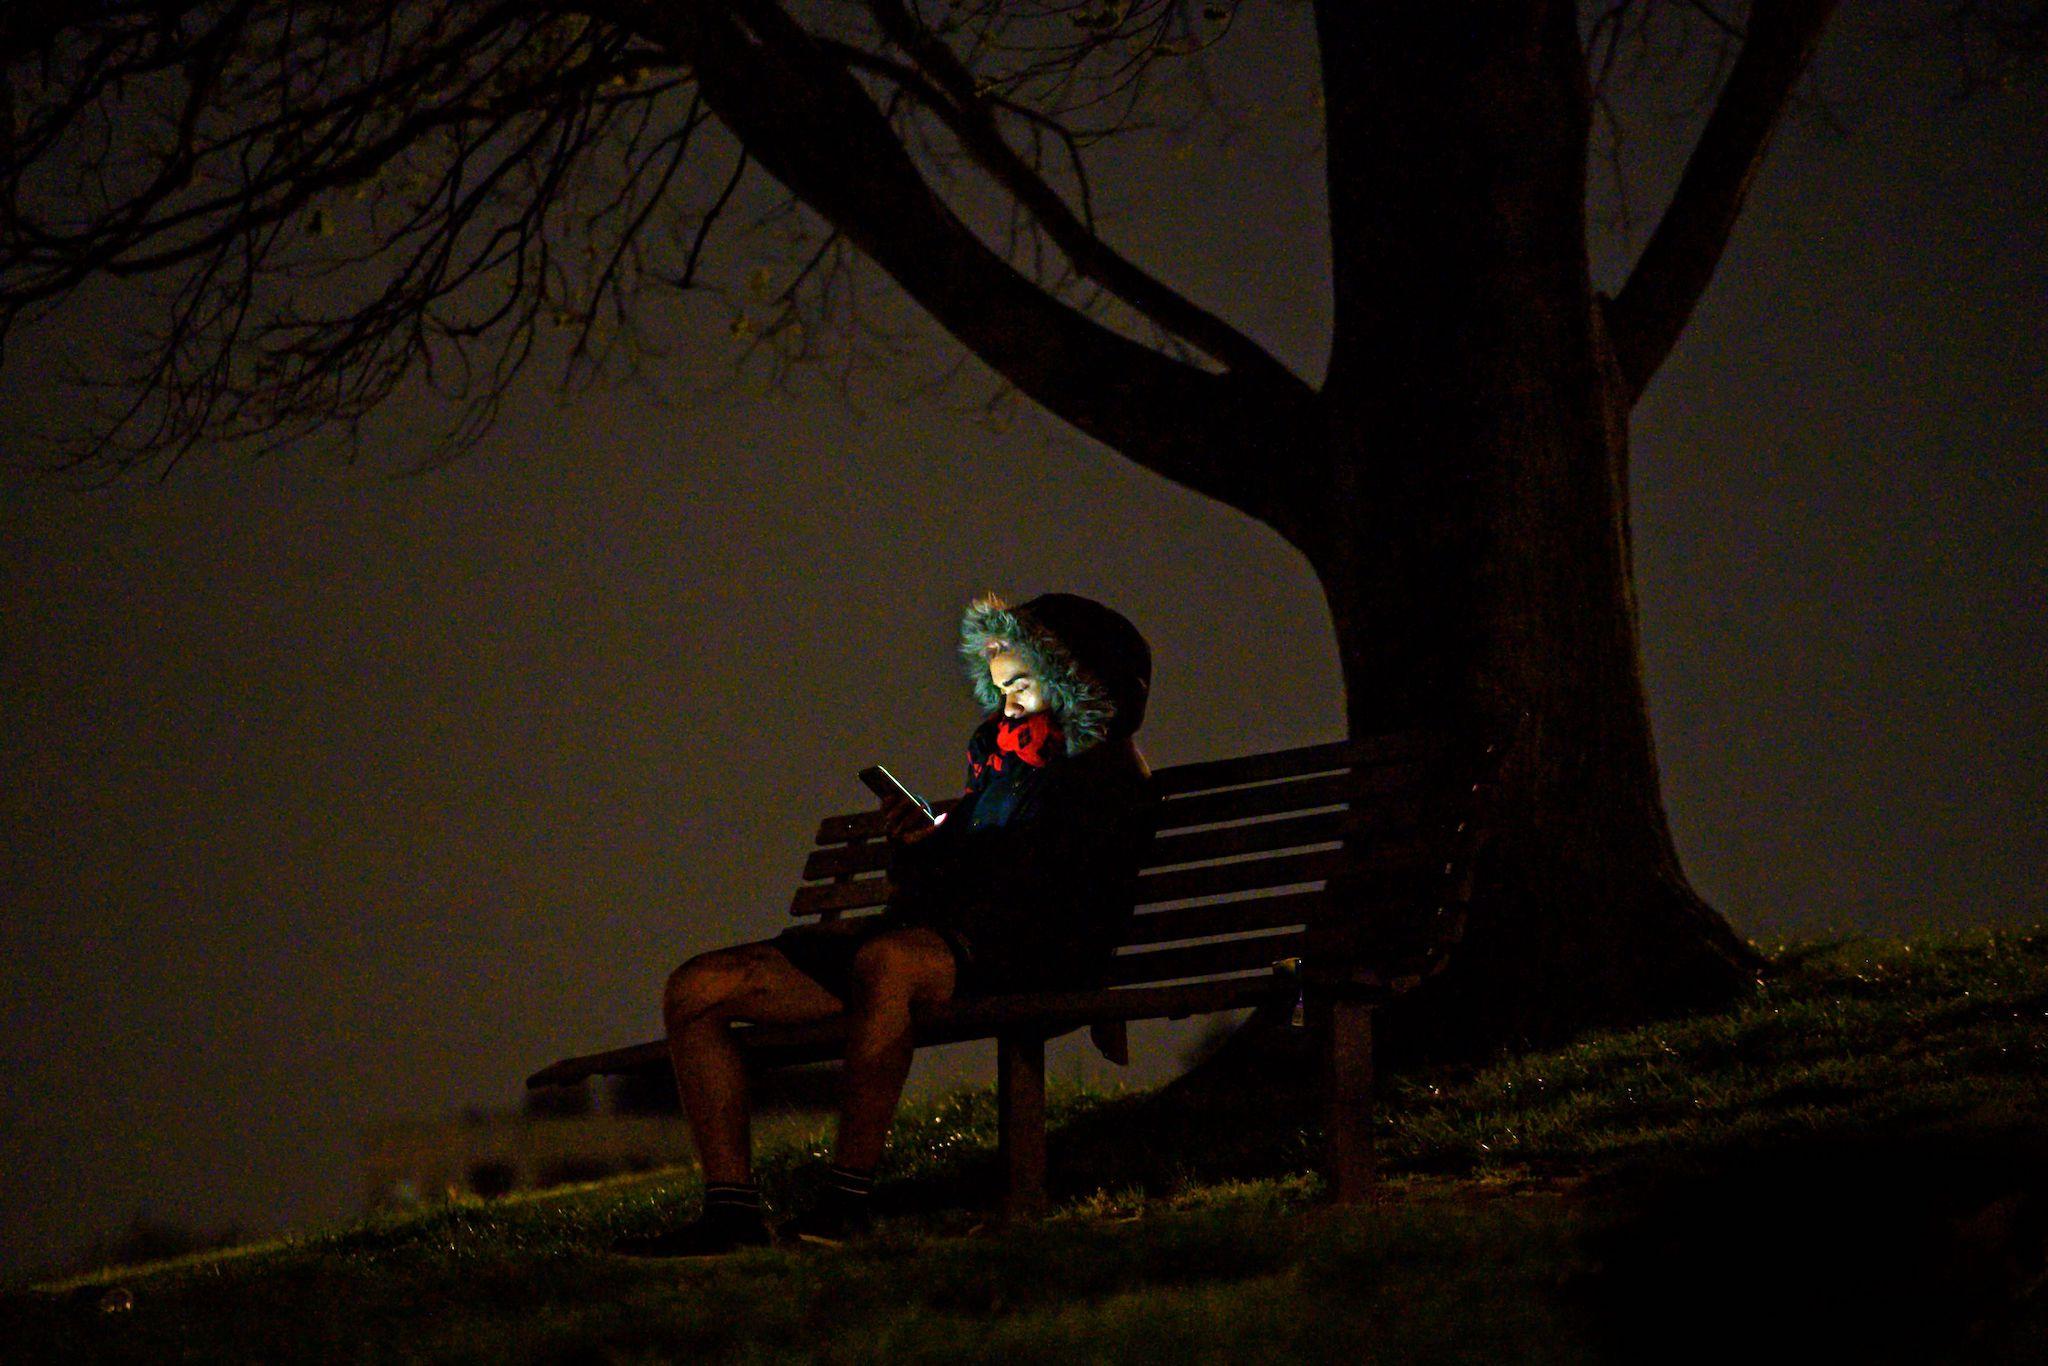 A man sits on a bench looking at his mobile phone at night on Primrose Hill in London on April 18, 2020, during the novel coronavirus COVID-19 pandemic